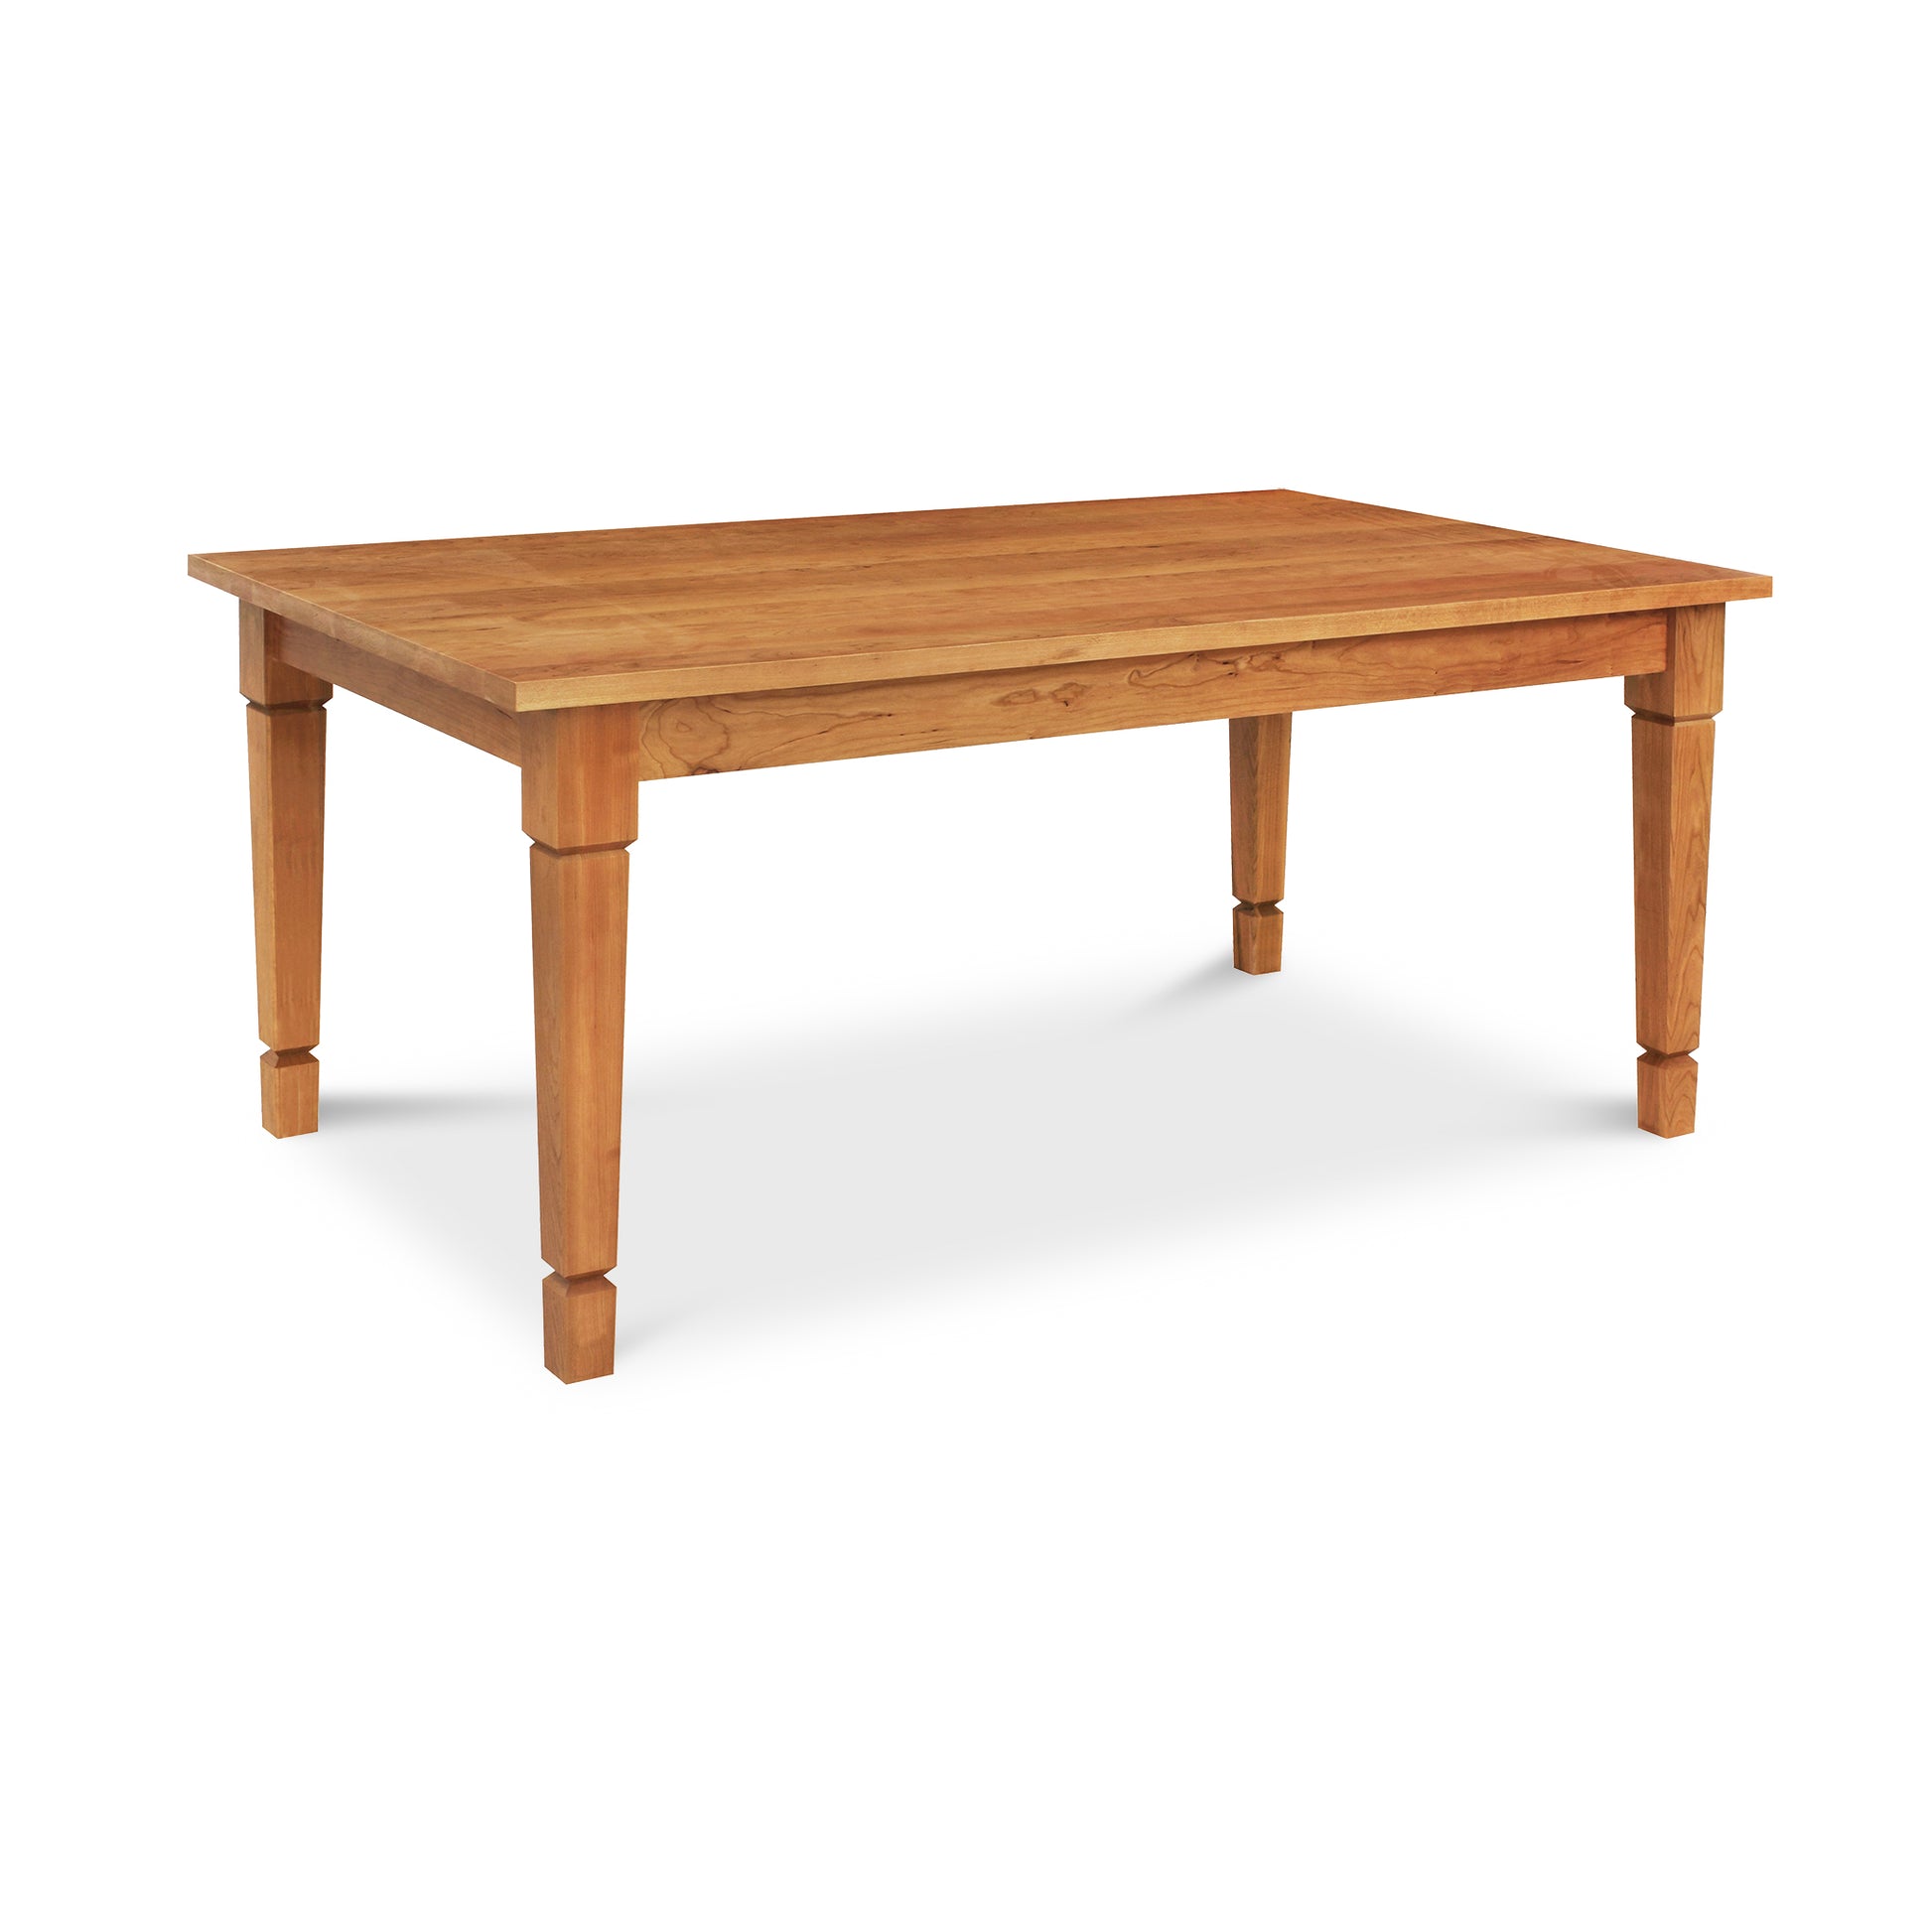 A Lyndon Furniture American Craftsman Solid Top Dining Table on a white background.